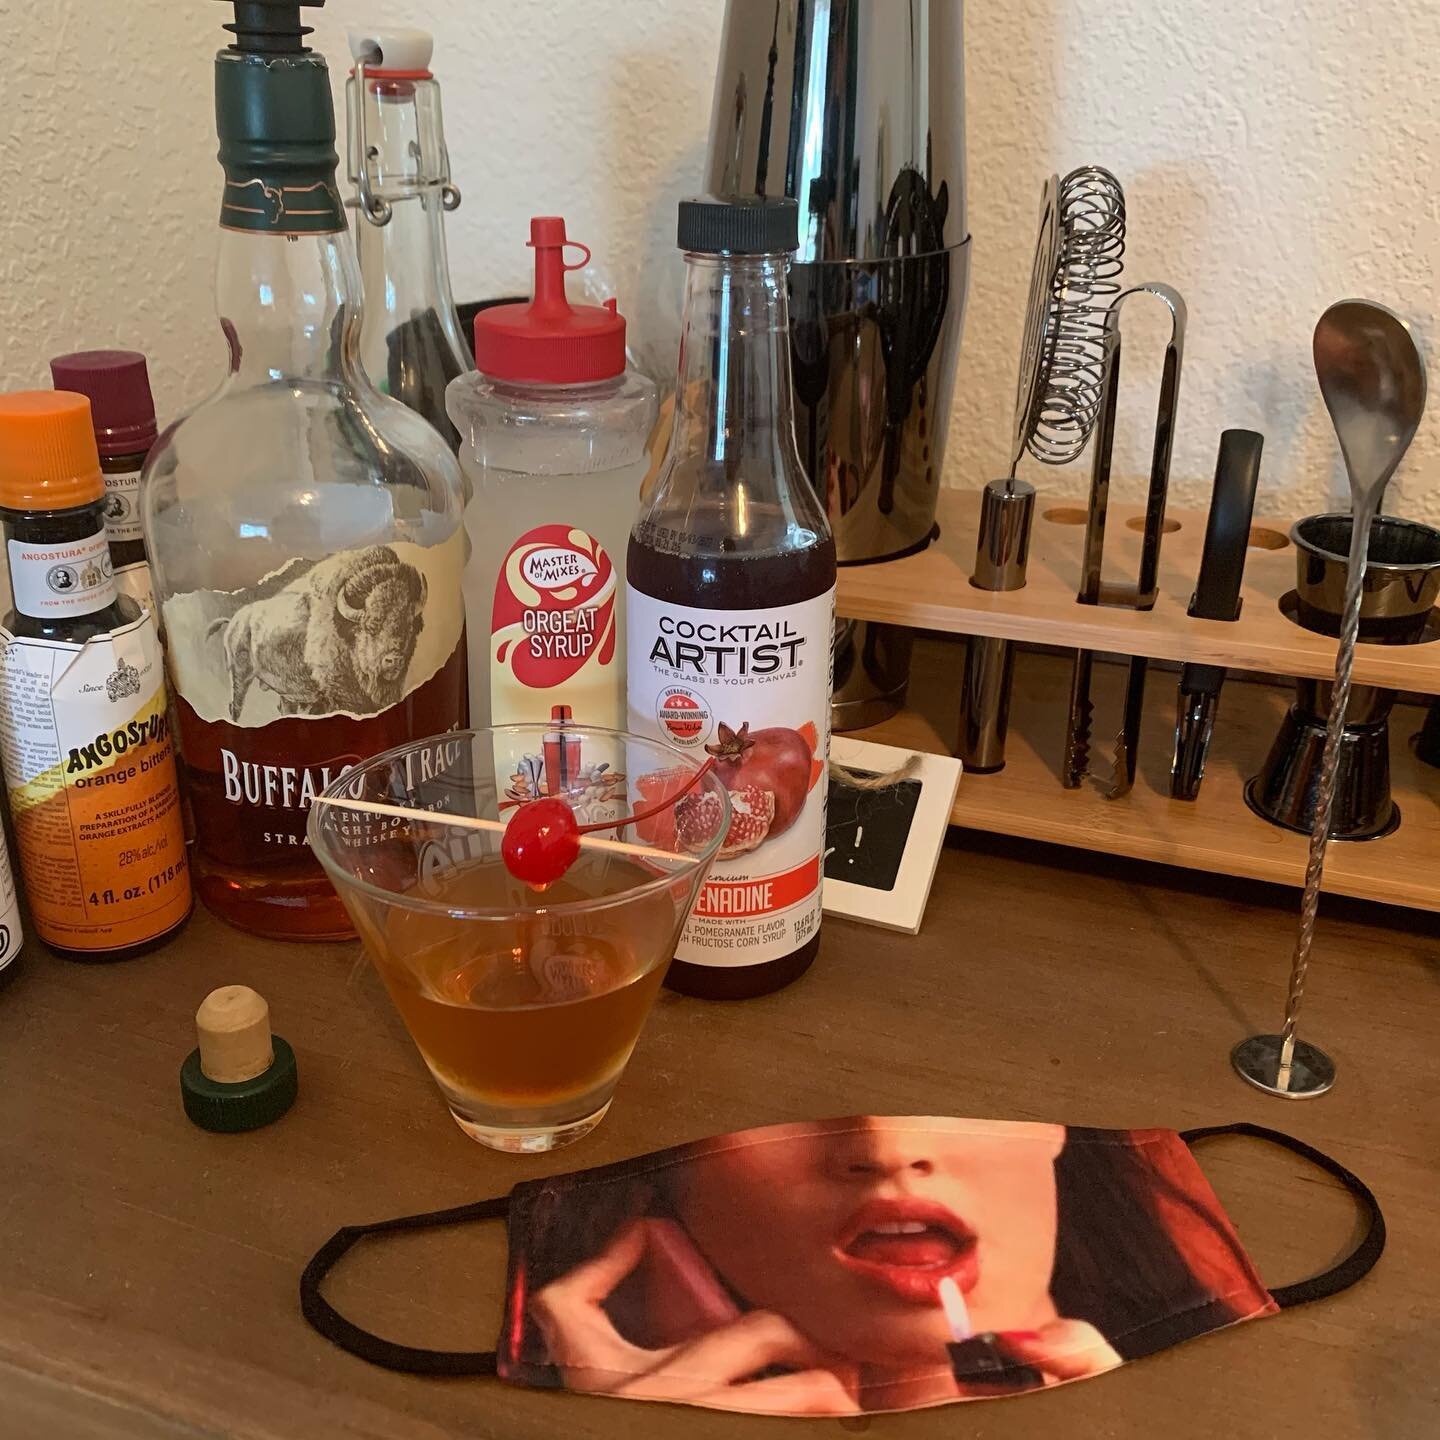 This one&rsquo;s for @luci_leclaire!
Jennifer&rsquo;s Body and a Devil&rsquo;s Kettle.

&bull;2oz of bourbon
&bull;1oz apple juice
&bull;.5 oz of almond syrup
&bull;2 dashes of Orange bitters
&bull;The blood of a man, but if you dont have any on hand